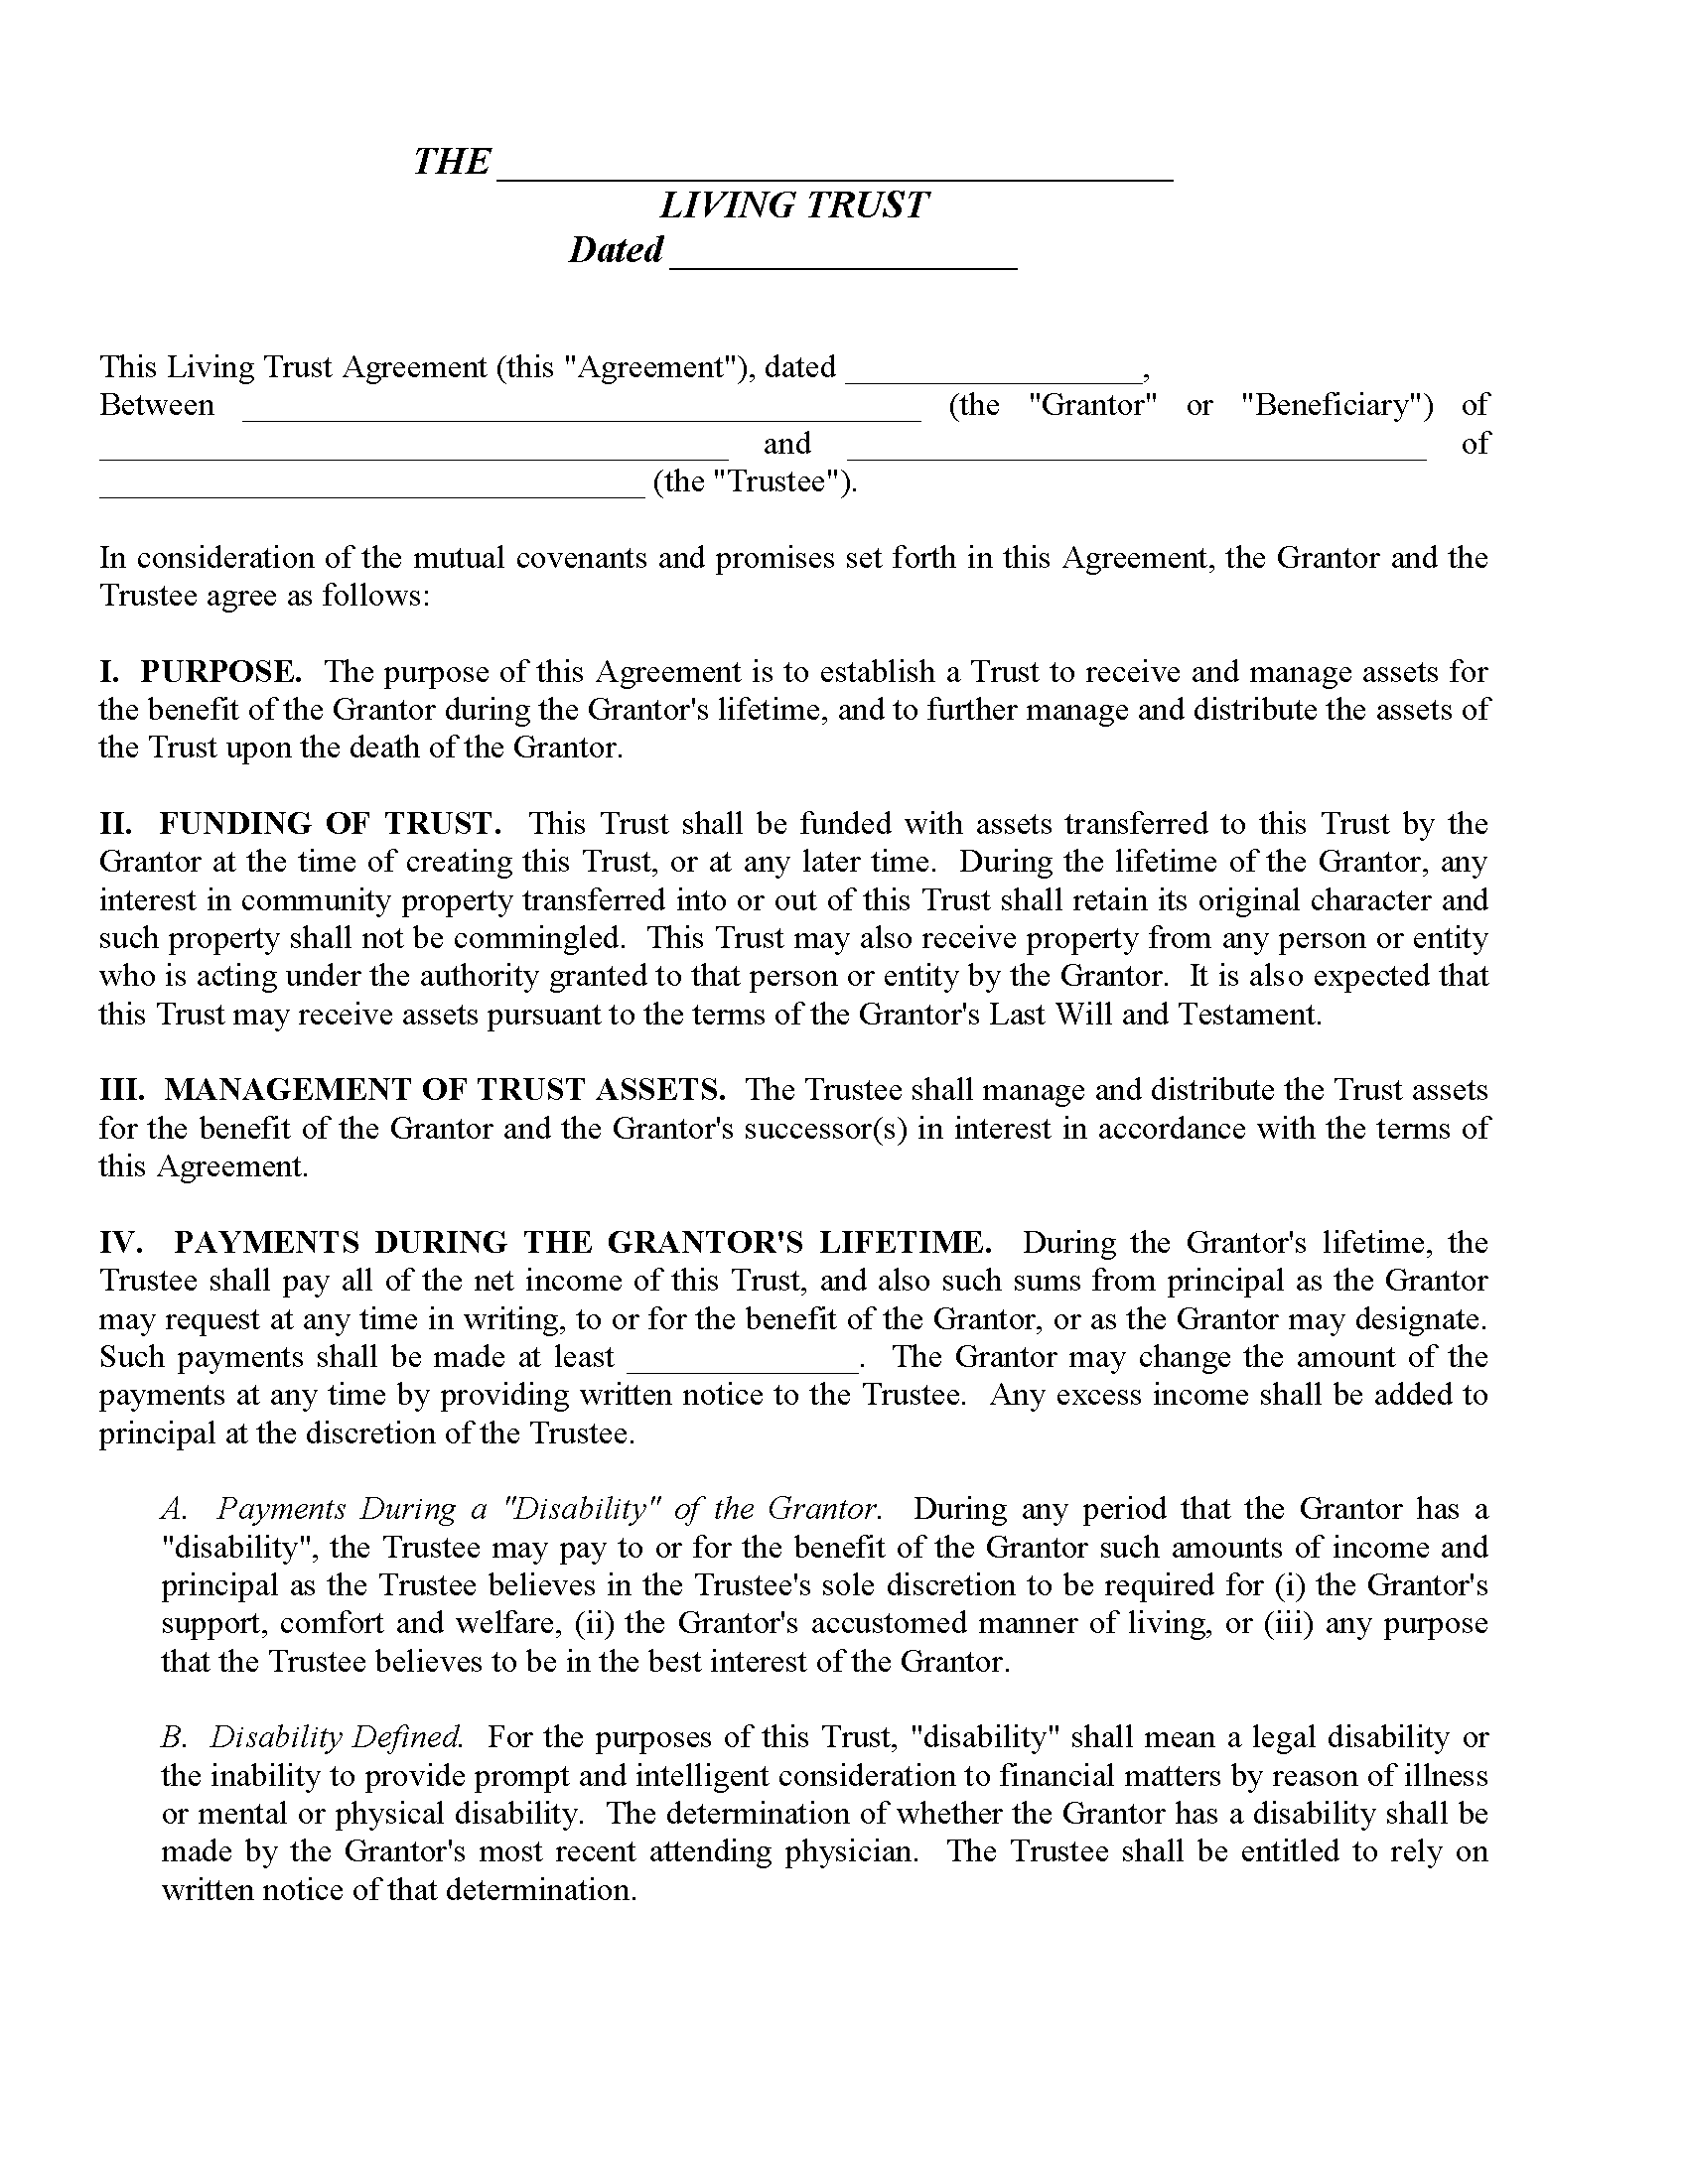 revocable-living-trust-form-free-printable-legal-forms